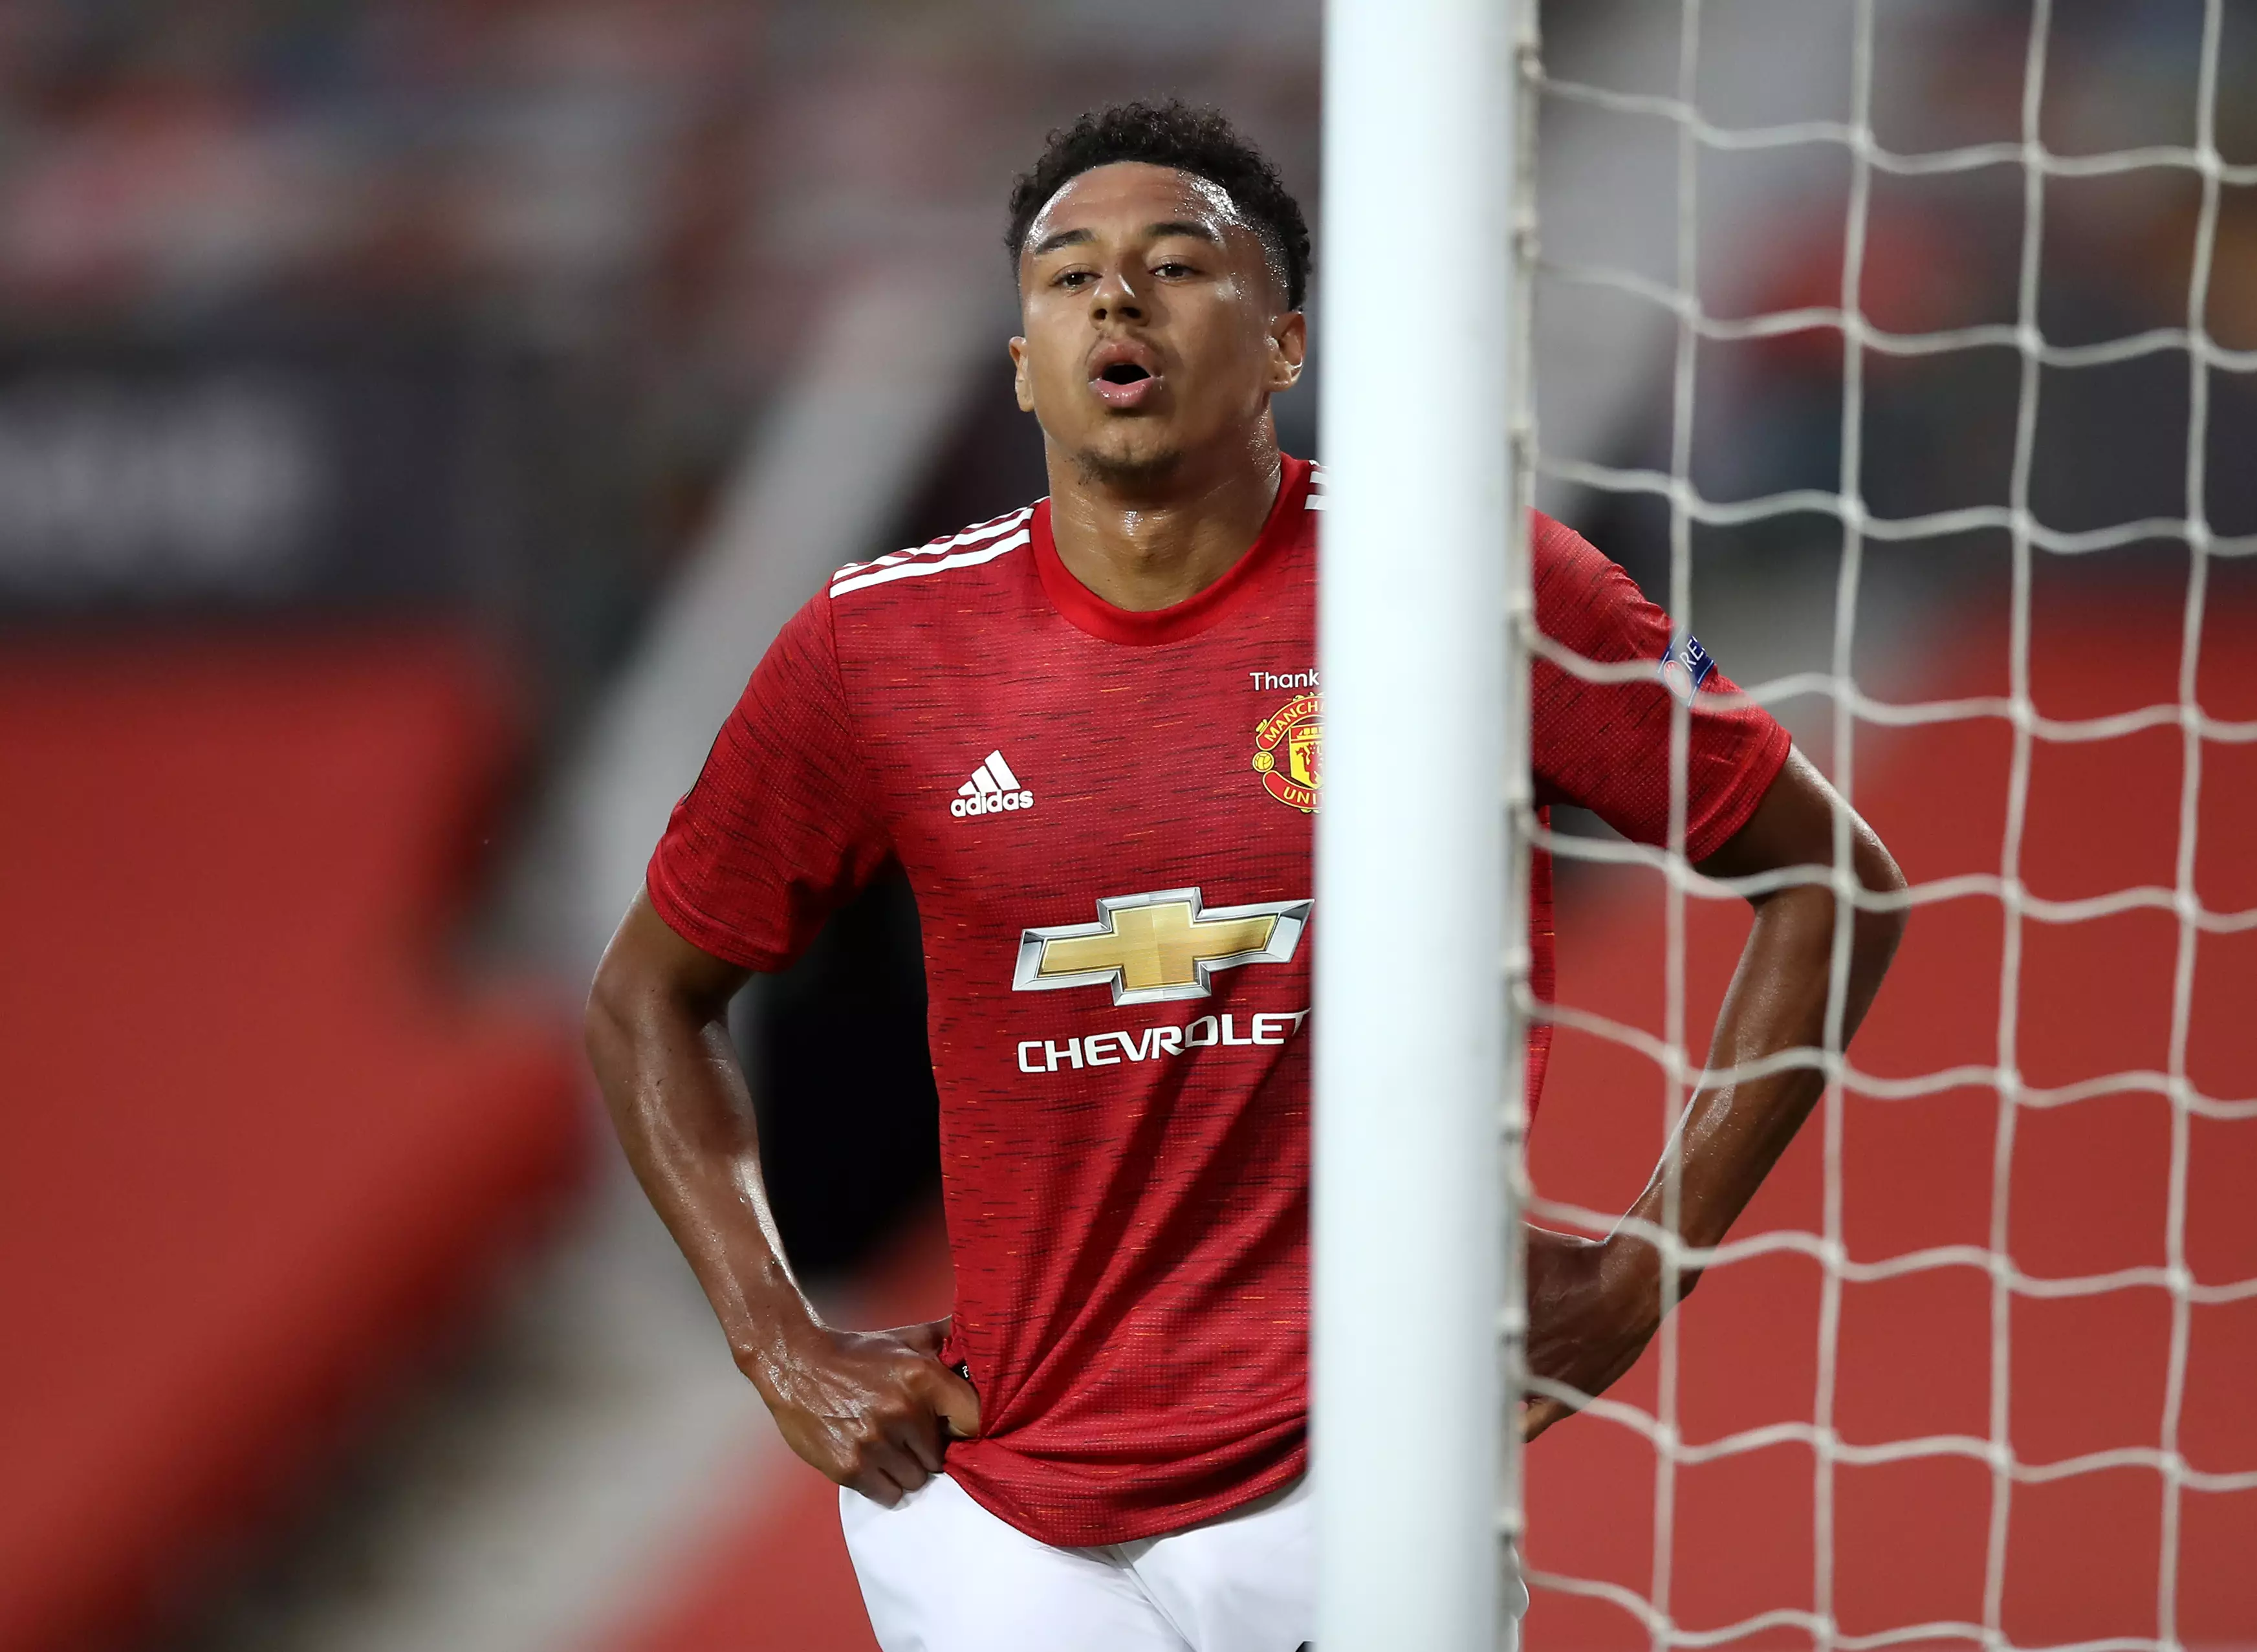 Things went sour at Old Trafford for Lingard. Image: PA Images